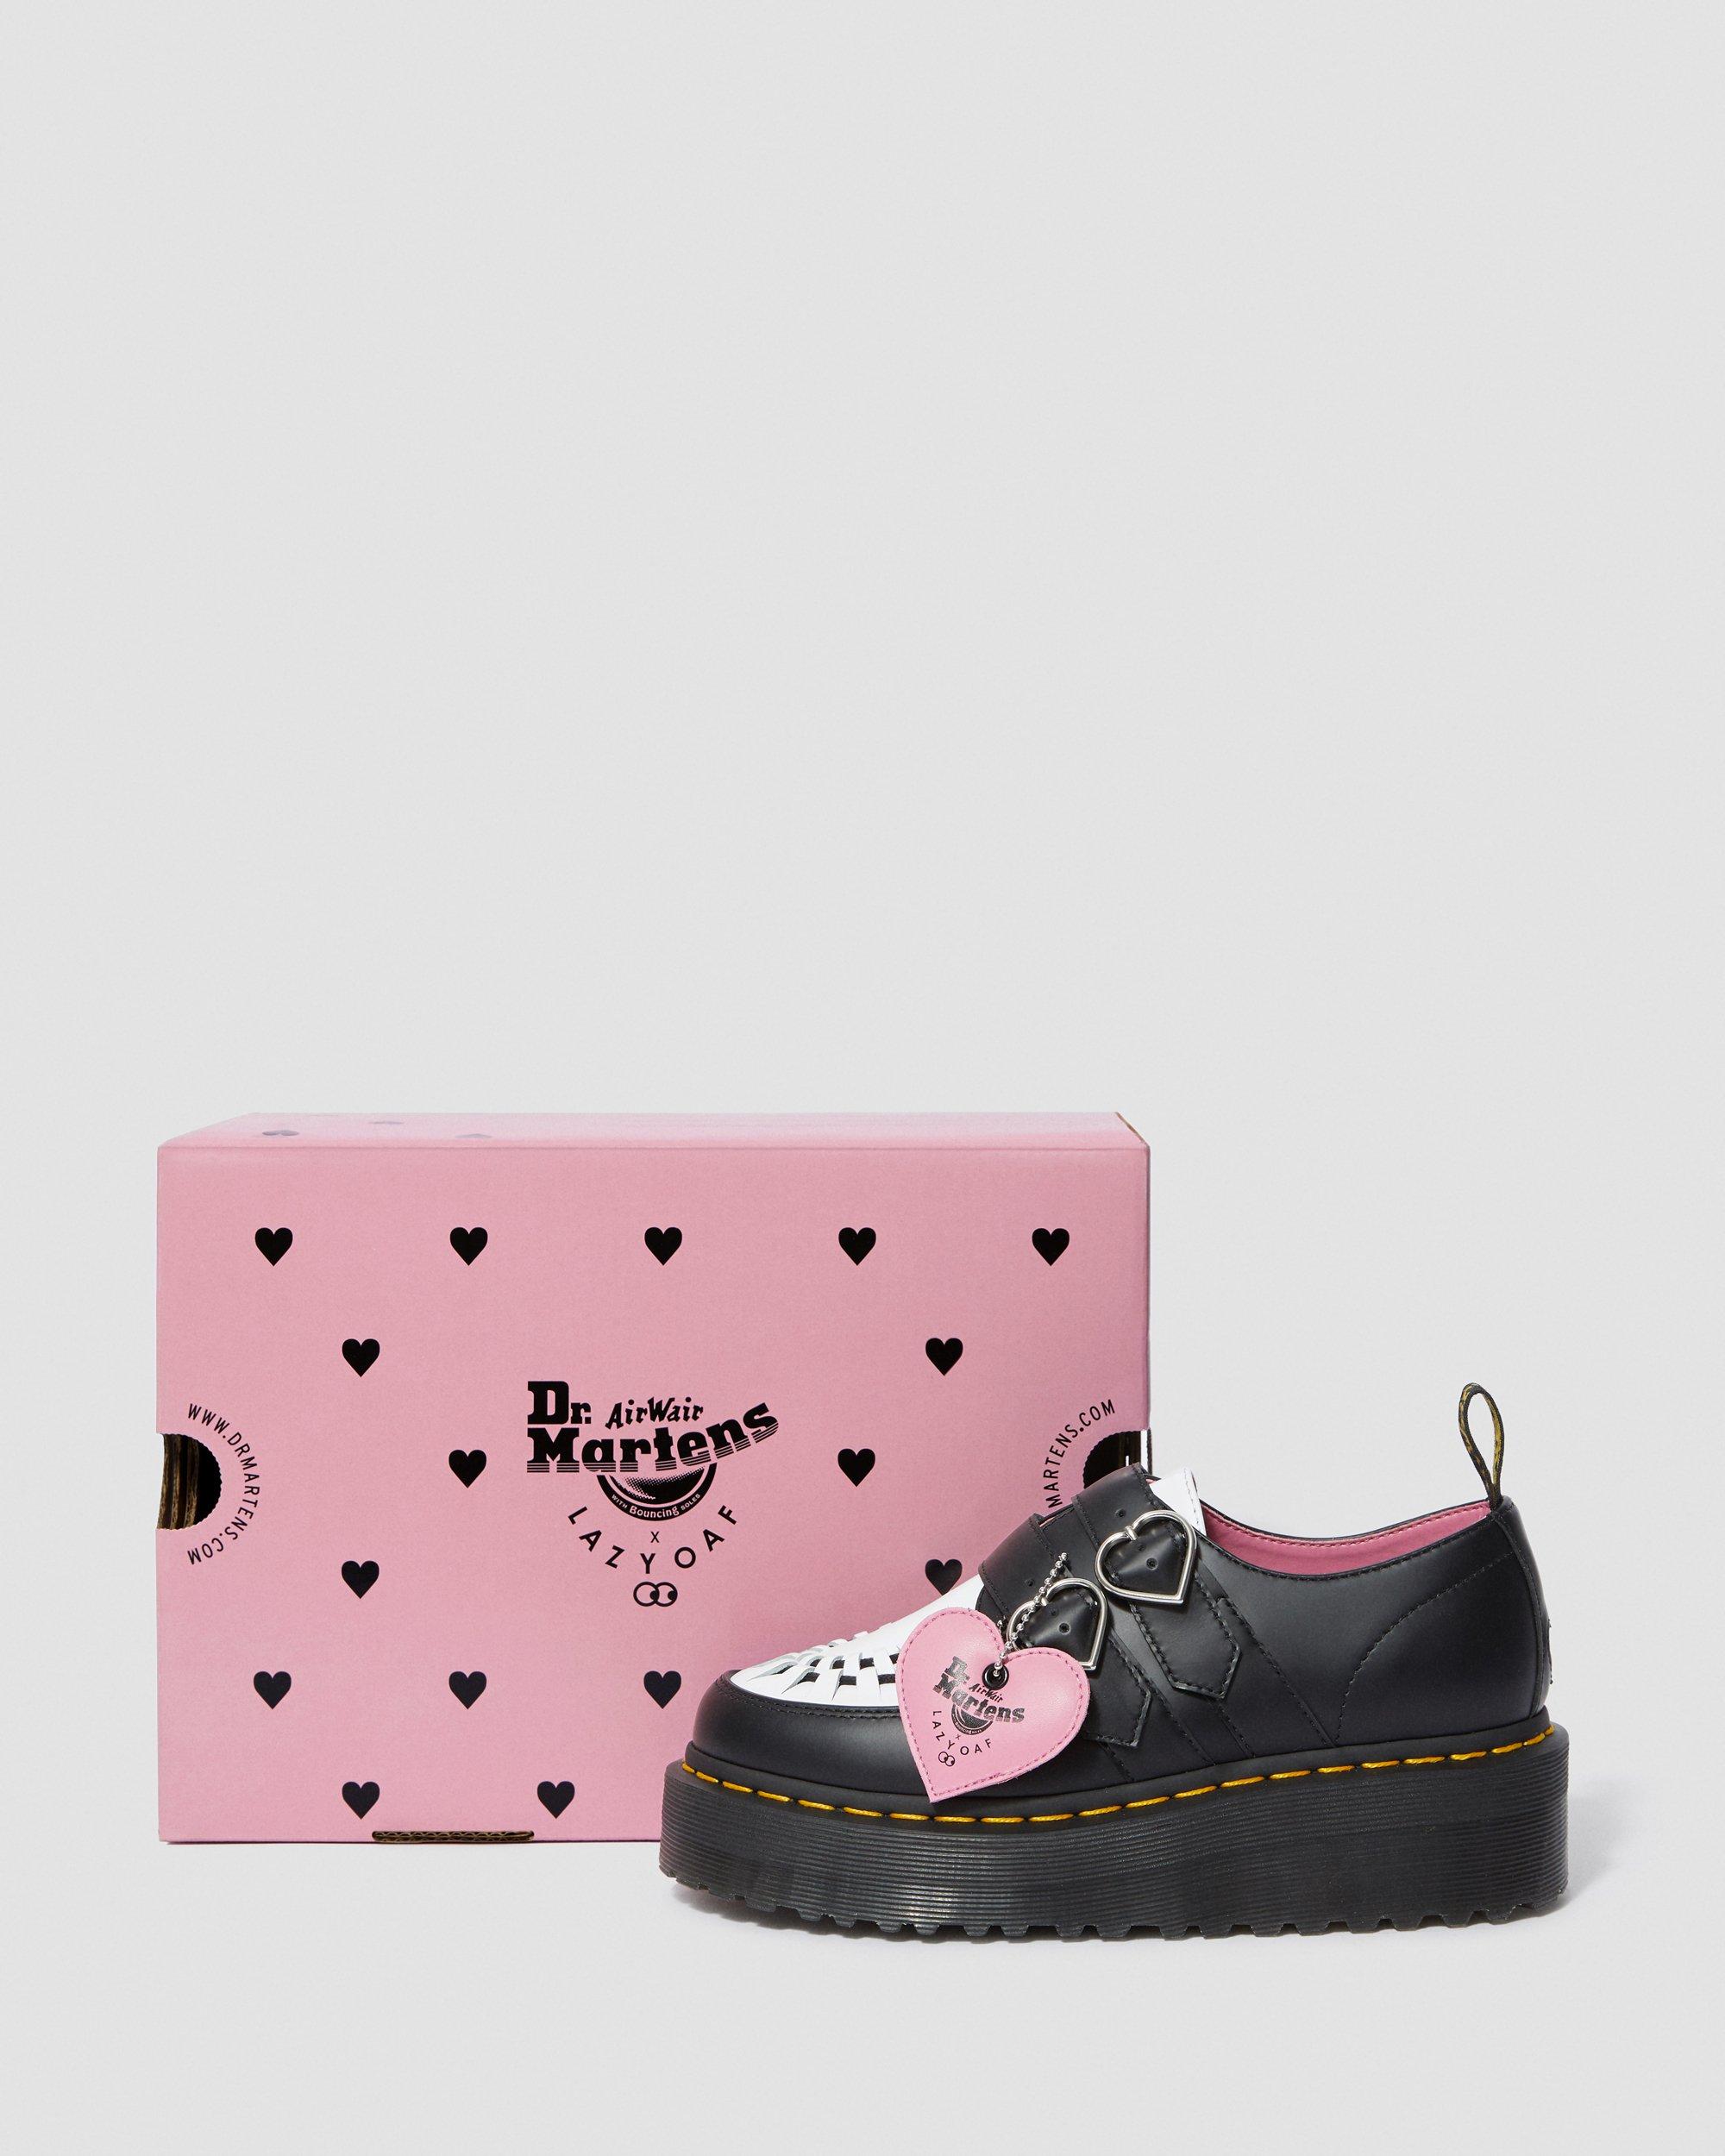 LAZY OAF BUCKLE CREEPER | Dr. Martens